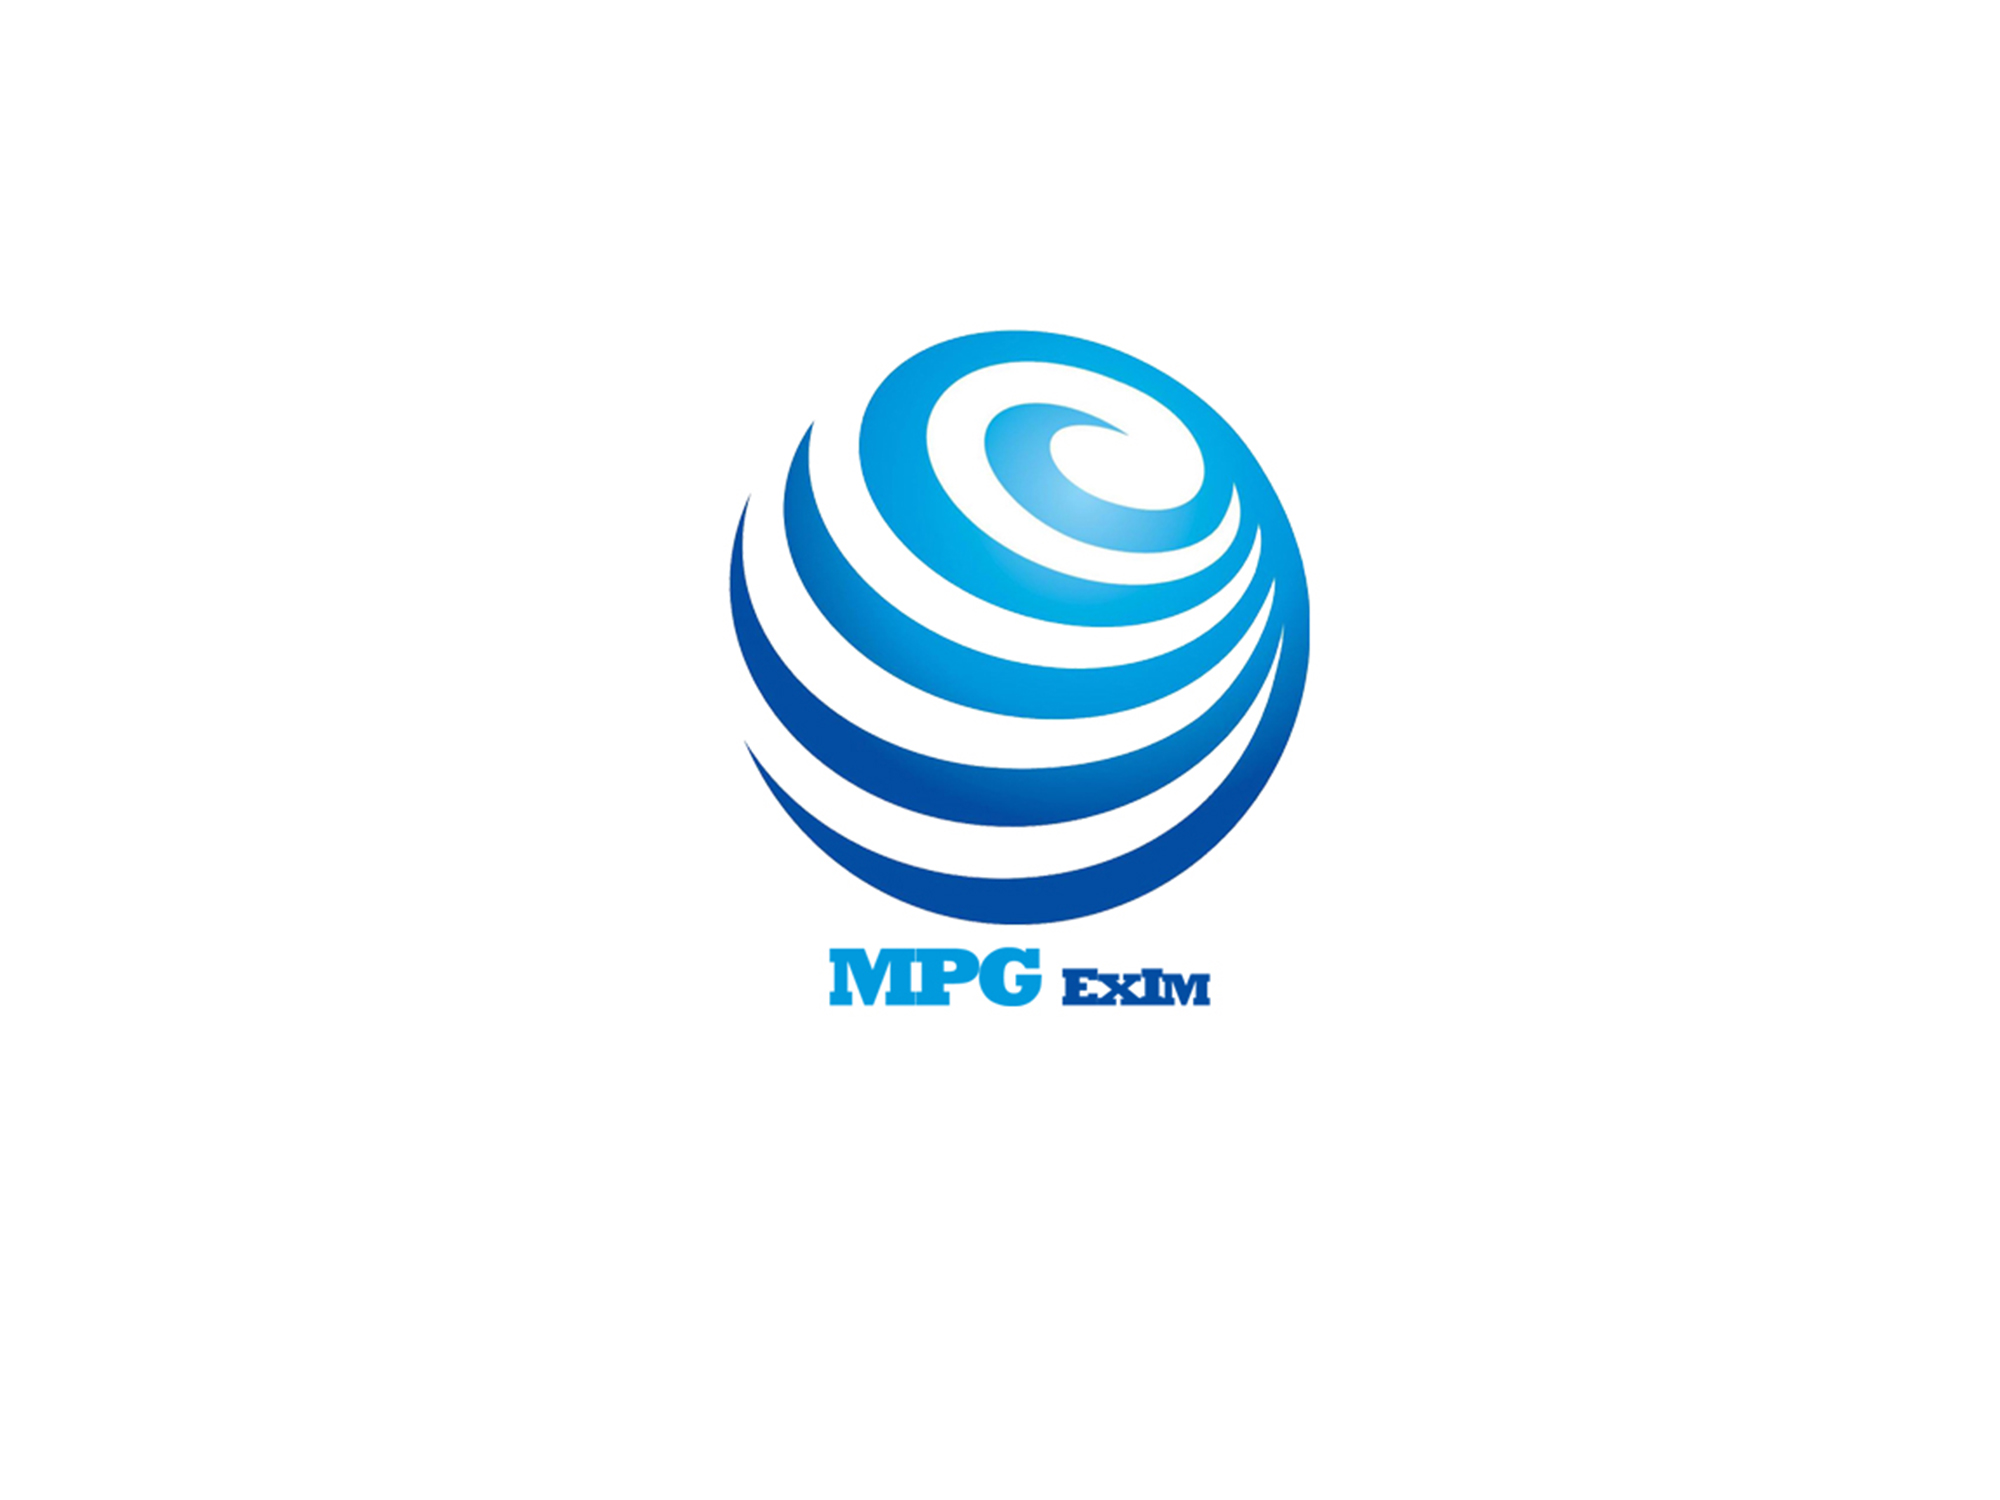 Mpg Exim - XpertLab Technologies Private Limited